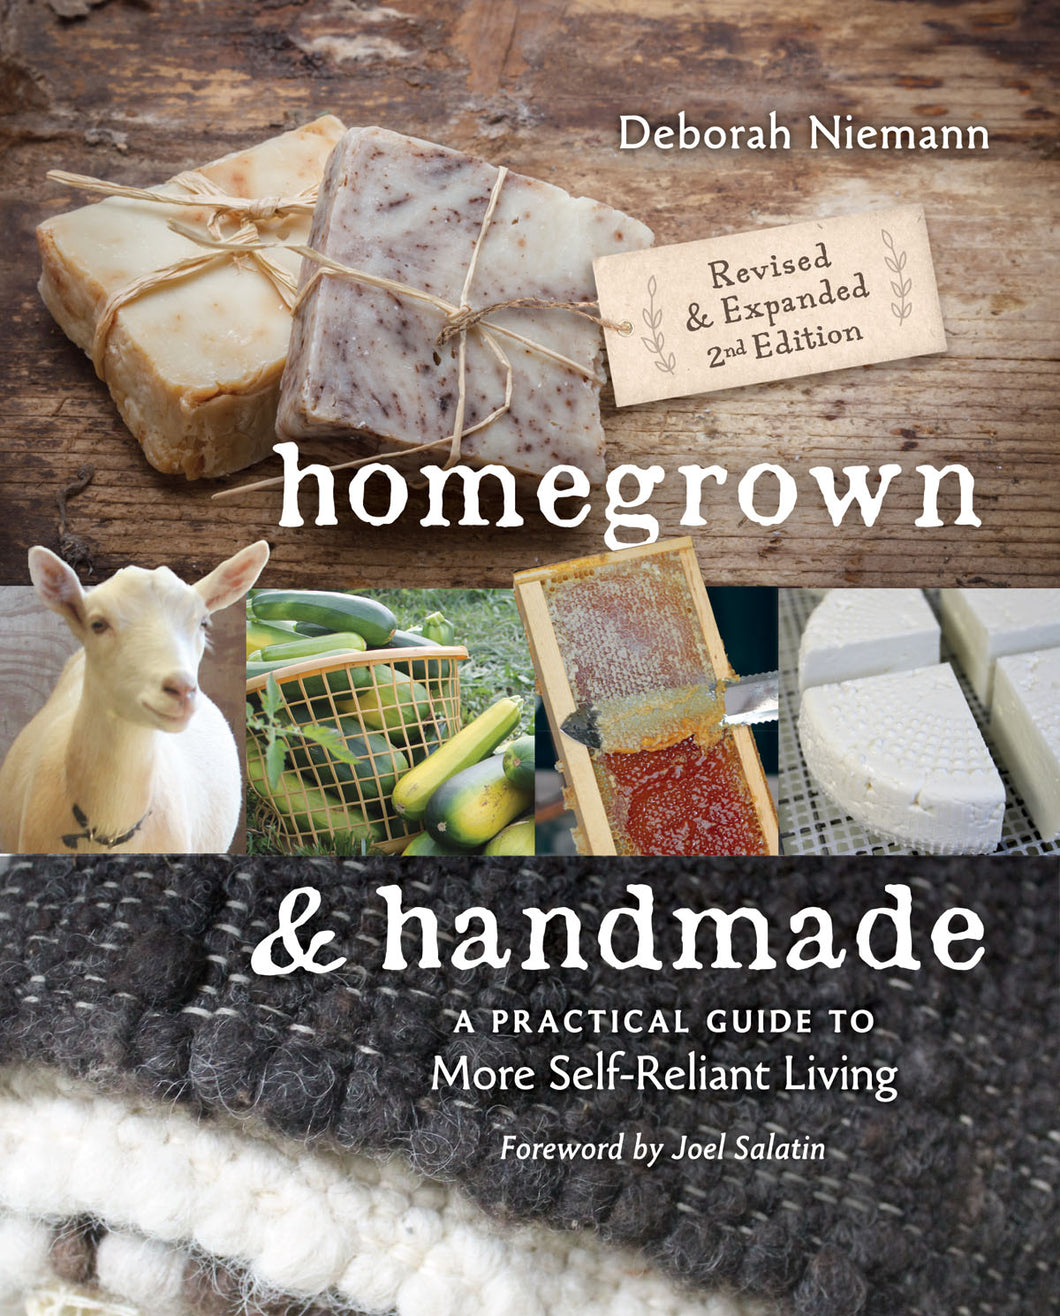 Homegrown and Handmade (second edition)